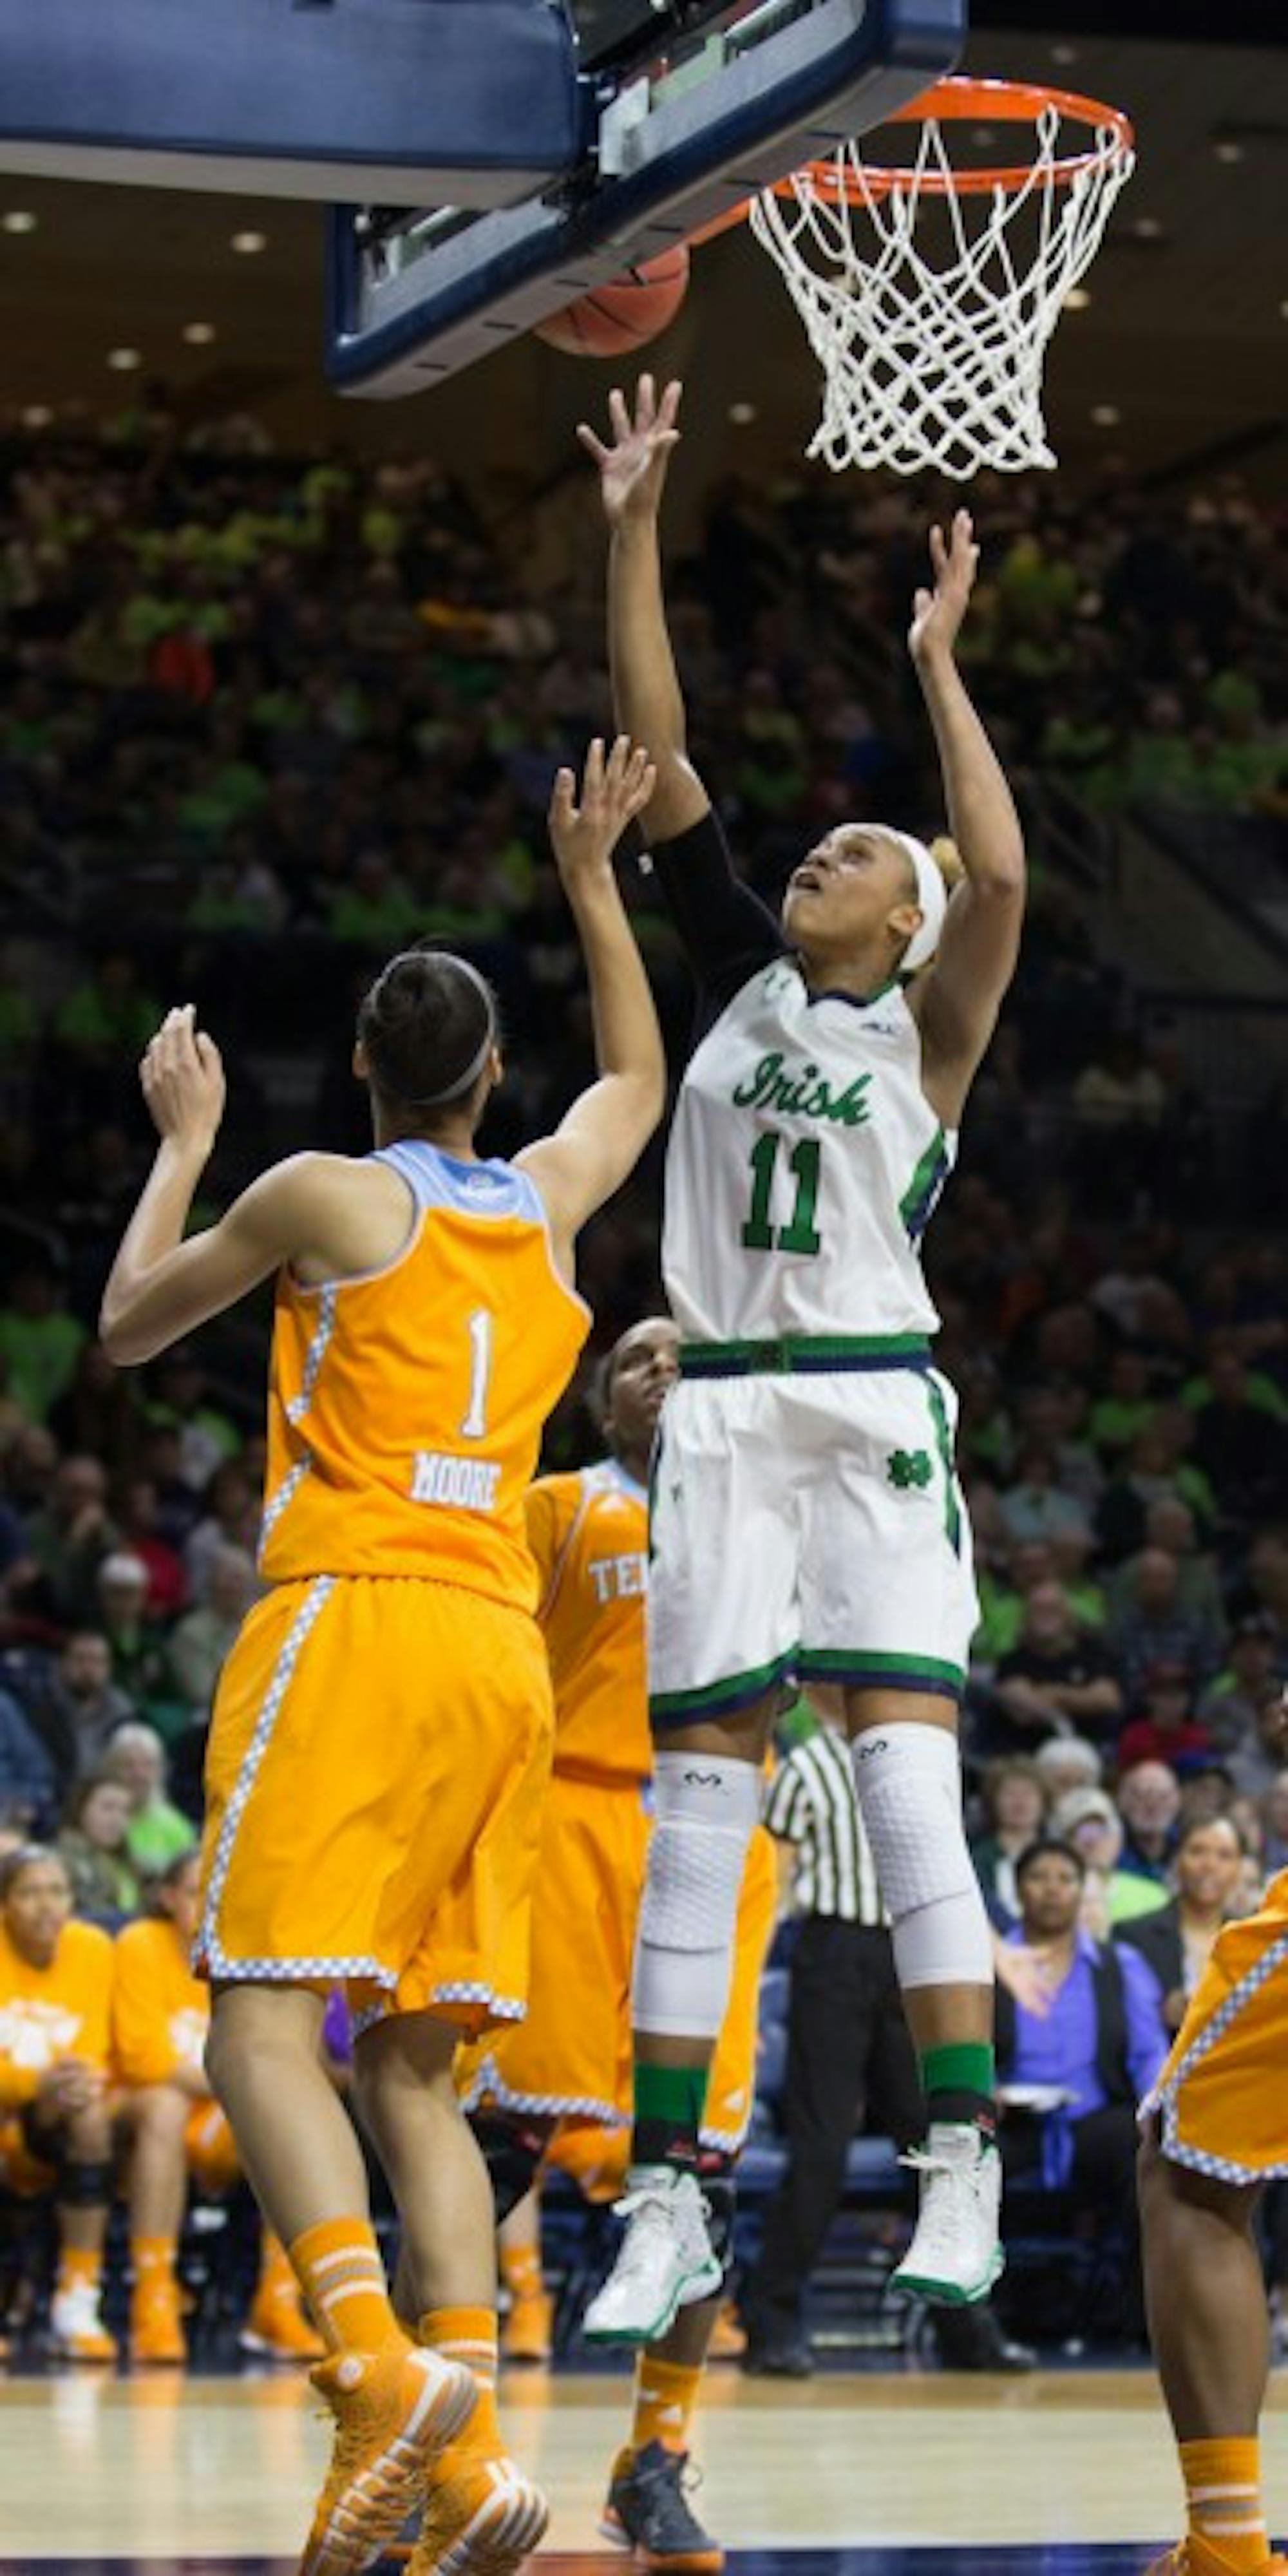 Irish freshman forward Brianna Turner lays a shot in during Notre Dame’s 88-77 win over Tennesse on Jan. 19 at Purcell Pavilion.